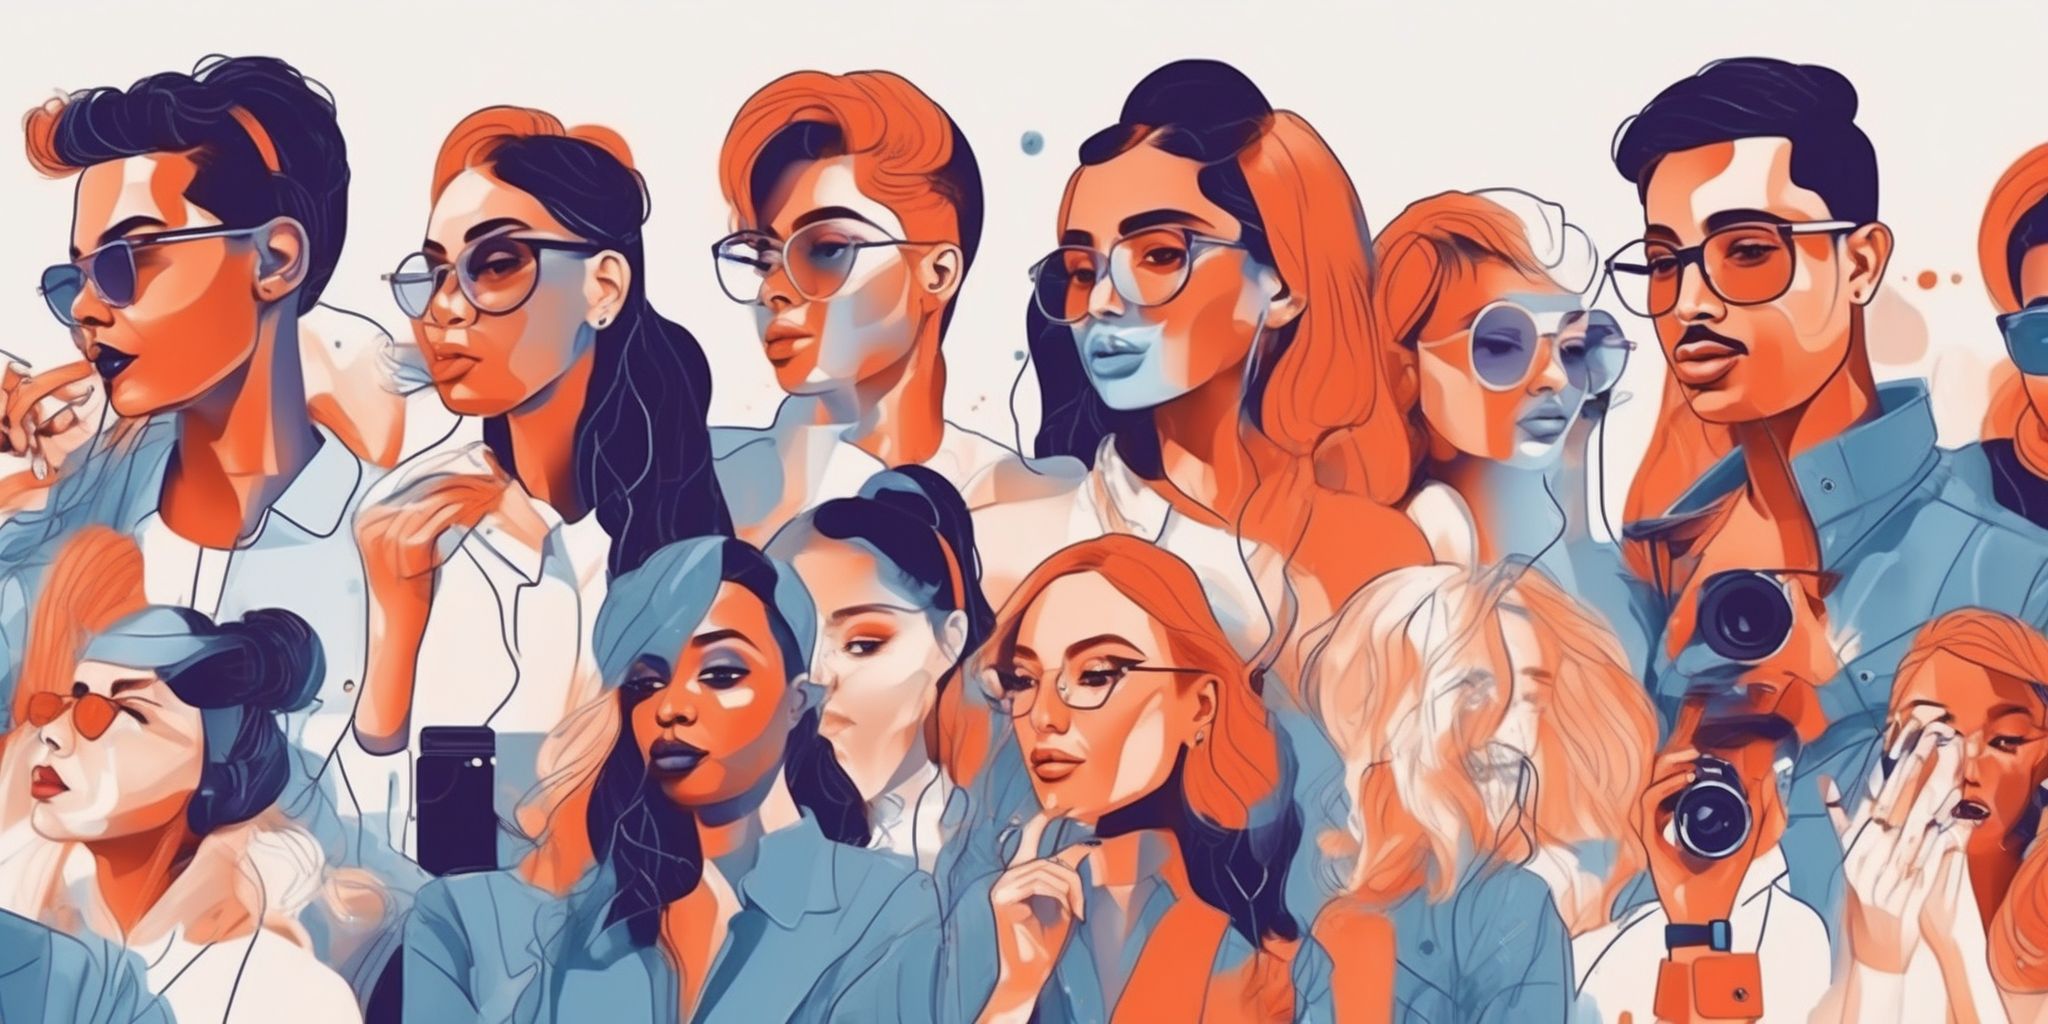 Influencers in illustration style with gradients and white background